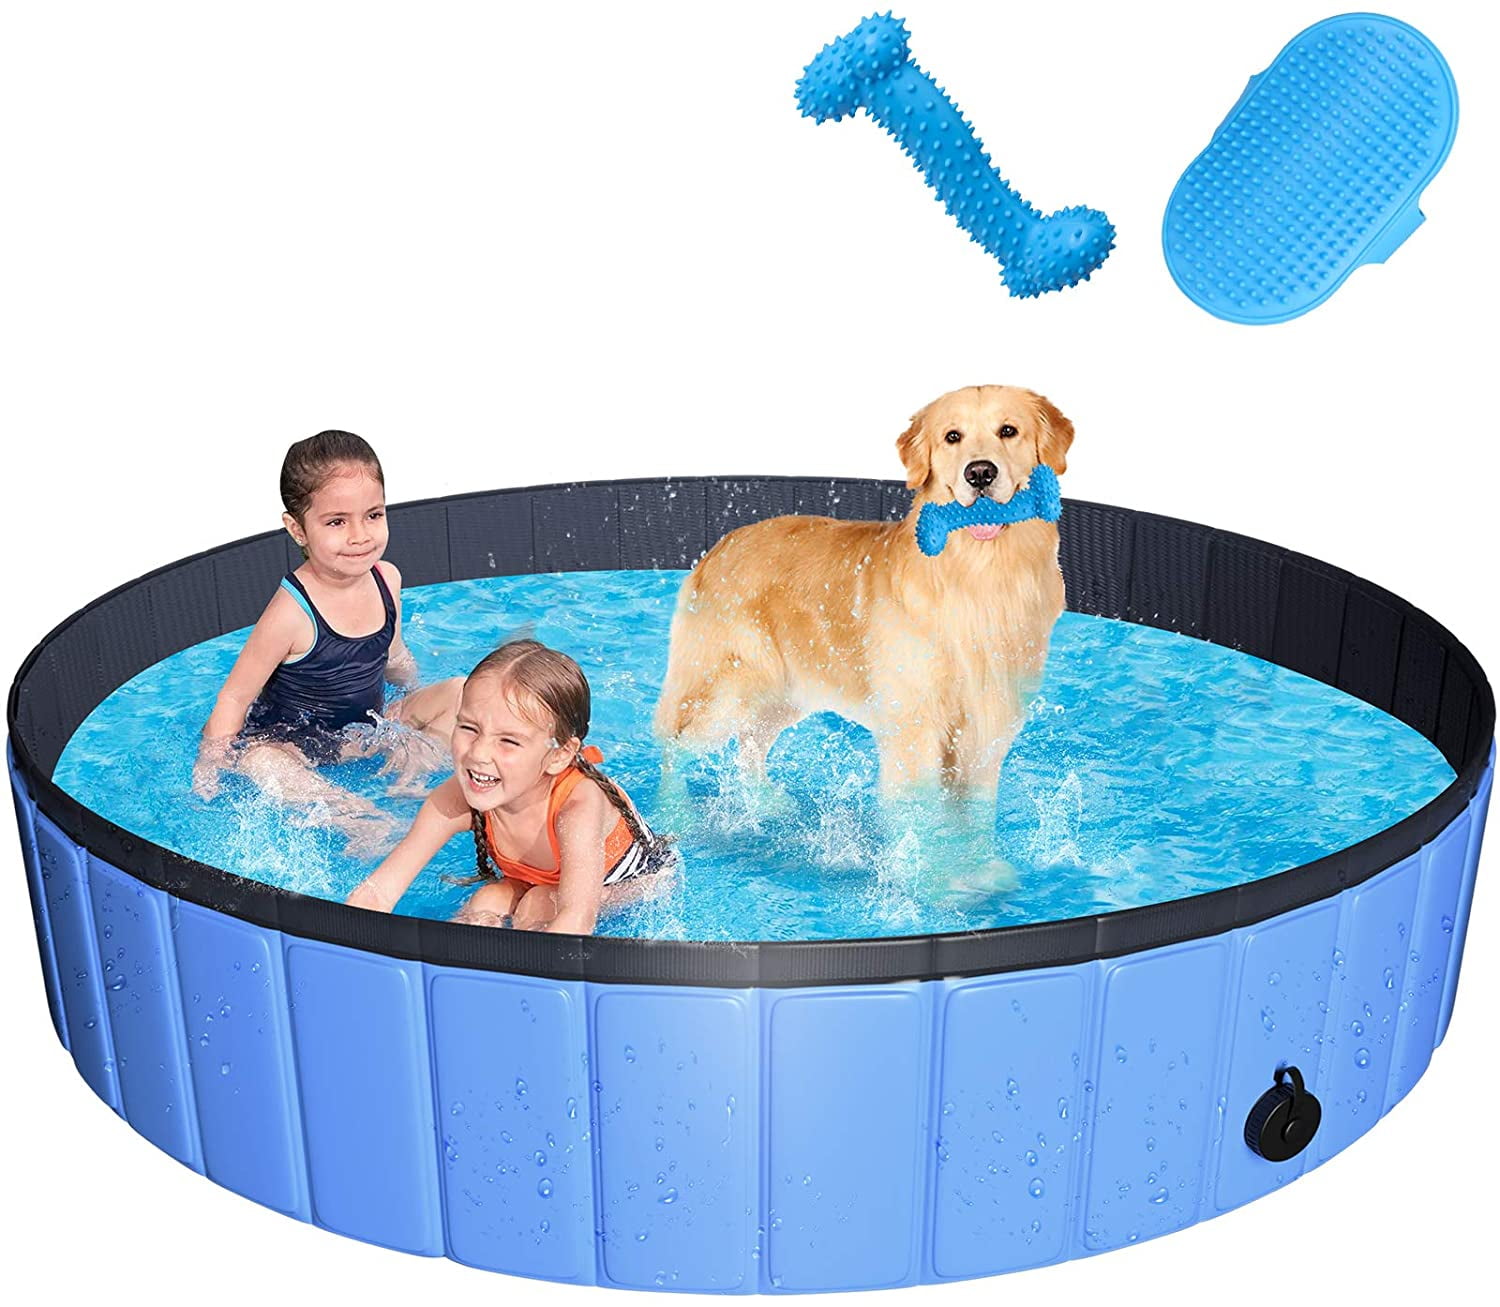 Collapsible Dog Pet Pool Croci Foldable Dog Pet Bath Pool 63x12 Inch Large Bathing Tub for Dogs Cats and Kids 